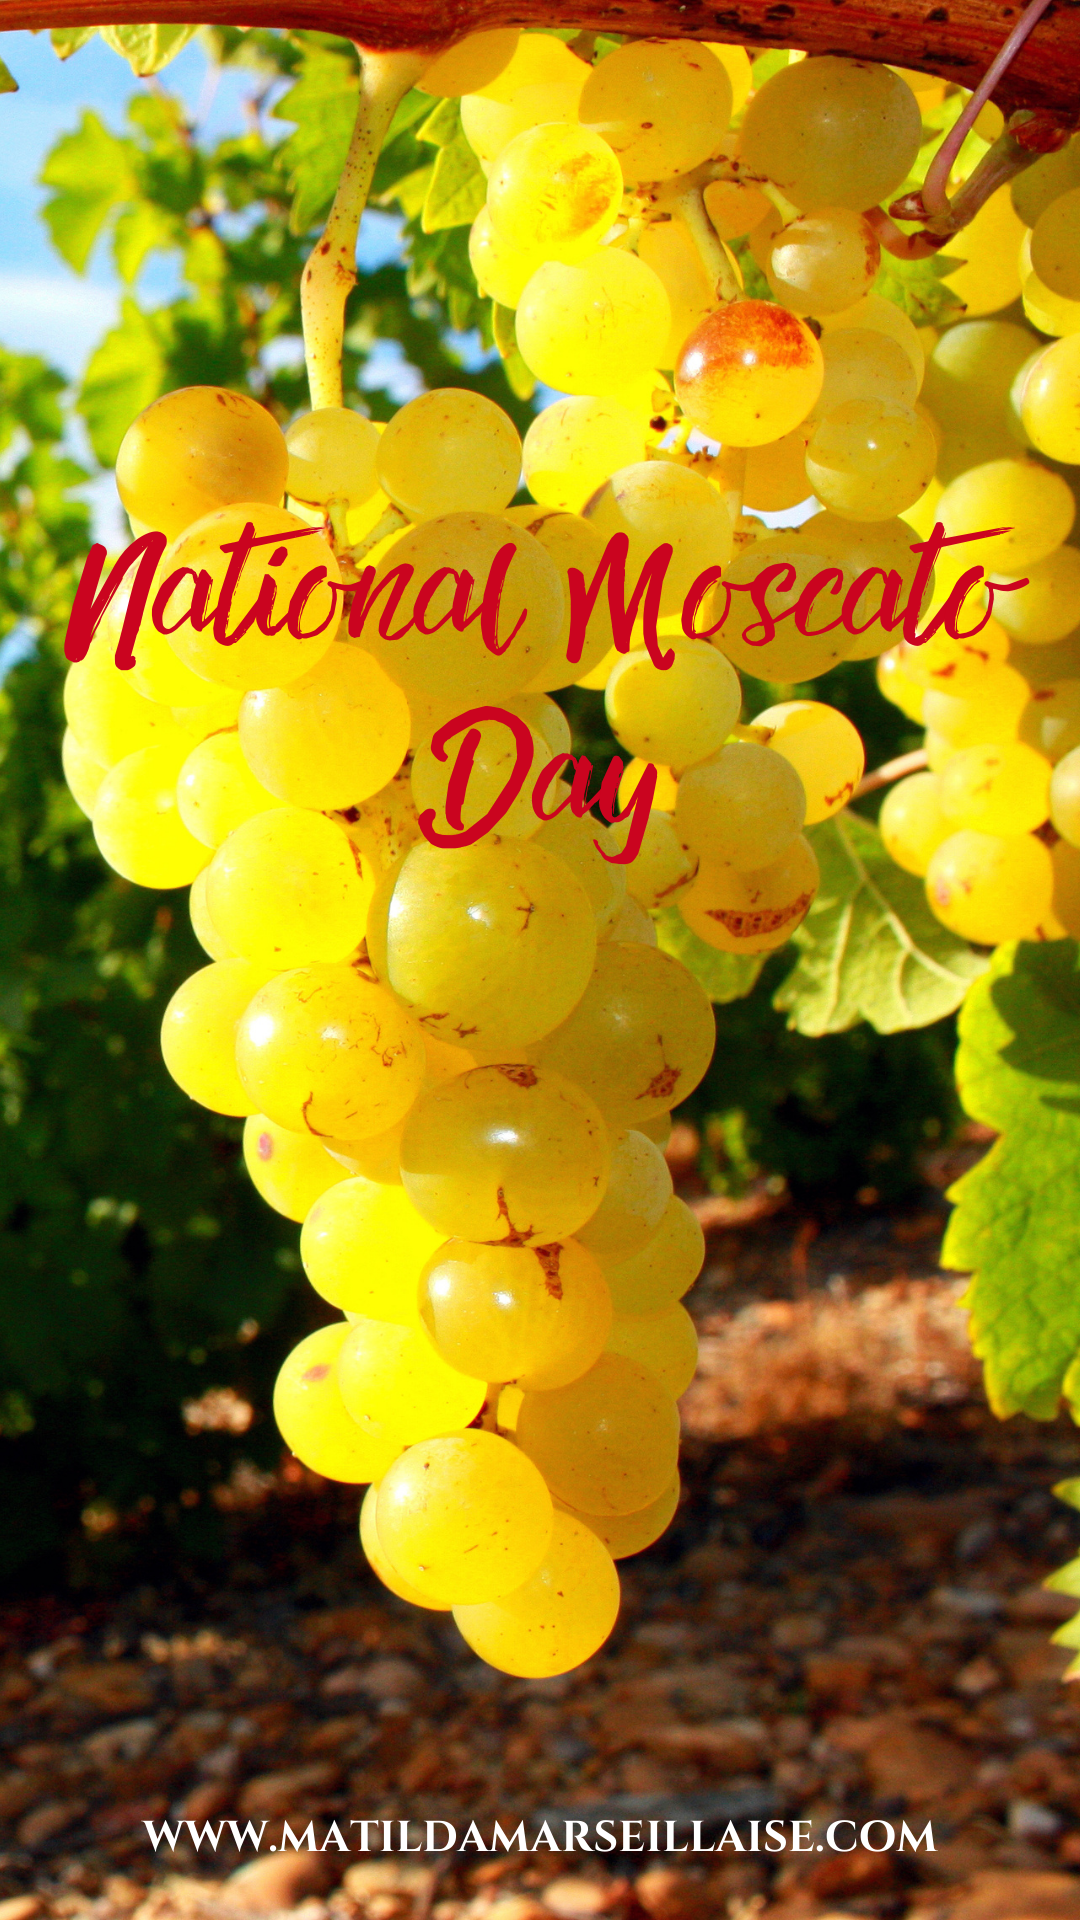 National Moscato Day 2022